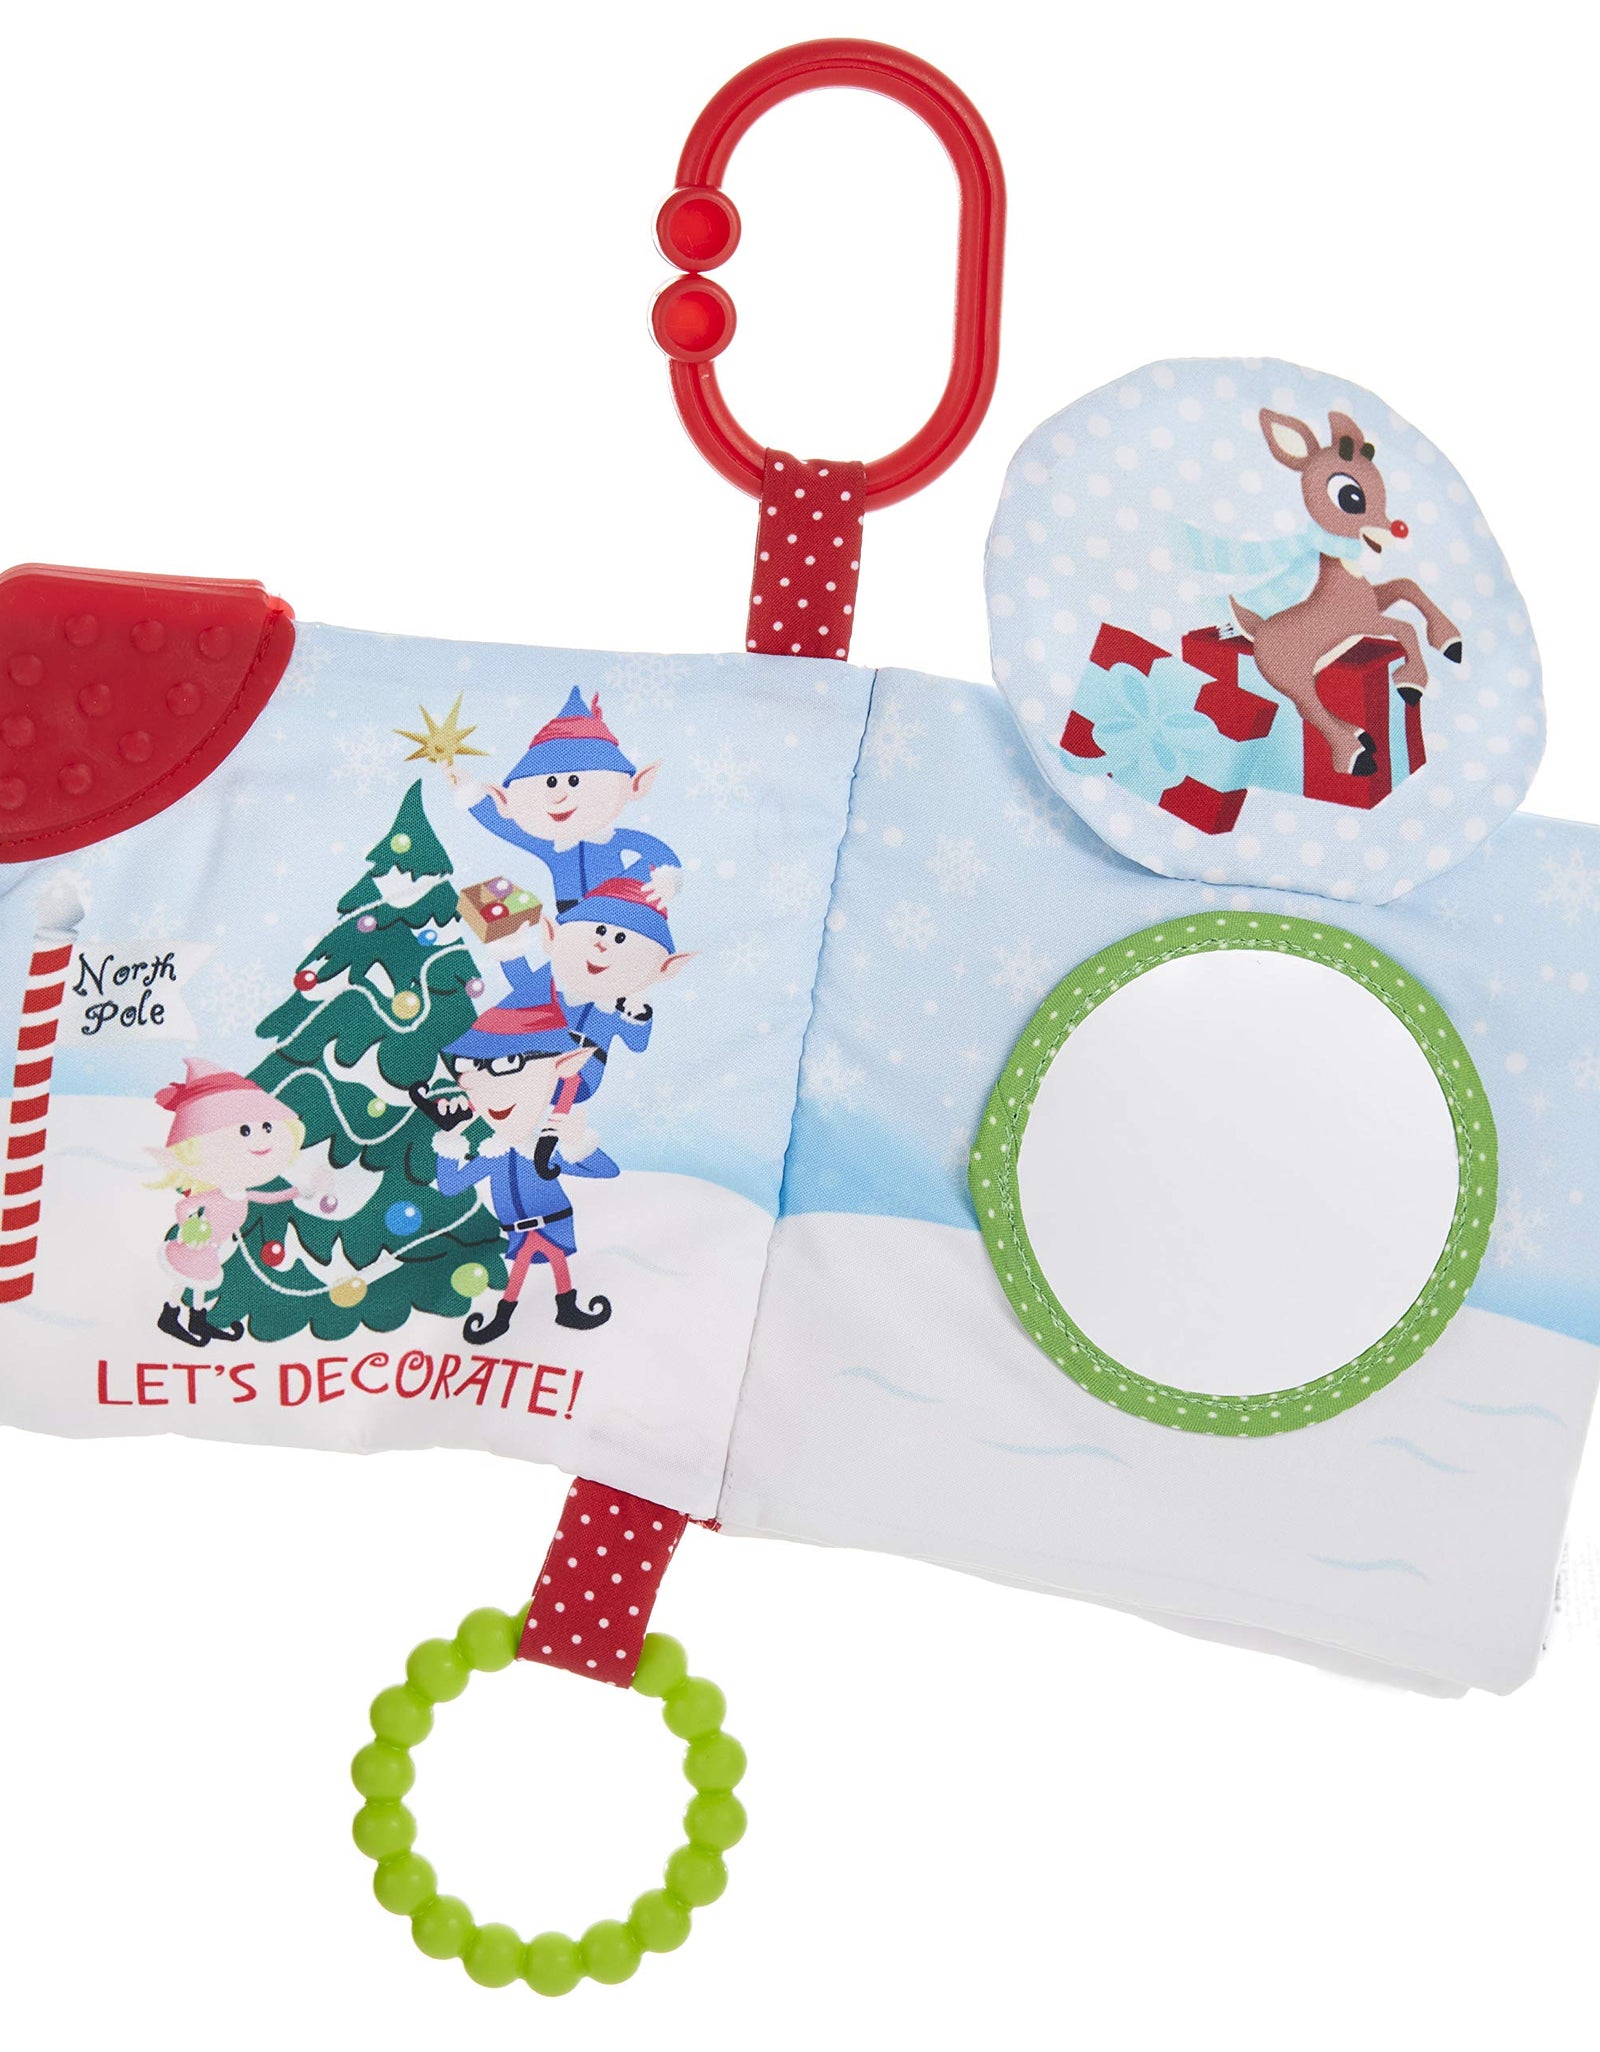 KIDS PREFERRED Rudolph The Red-Nosed Reindeer On The Go Soft Teether Book